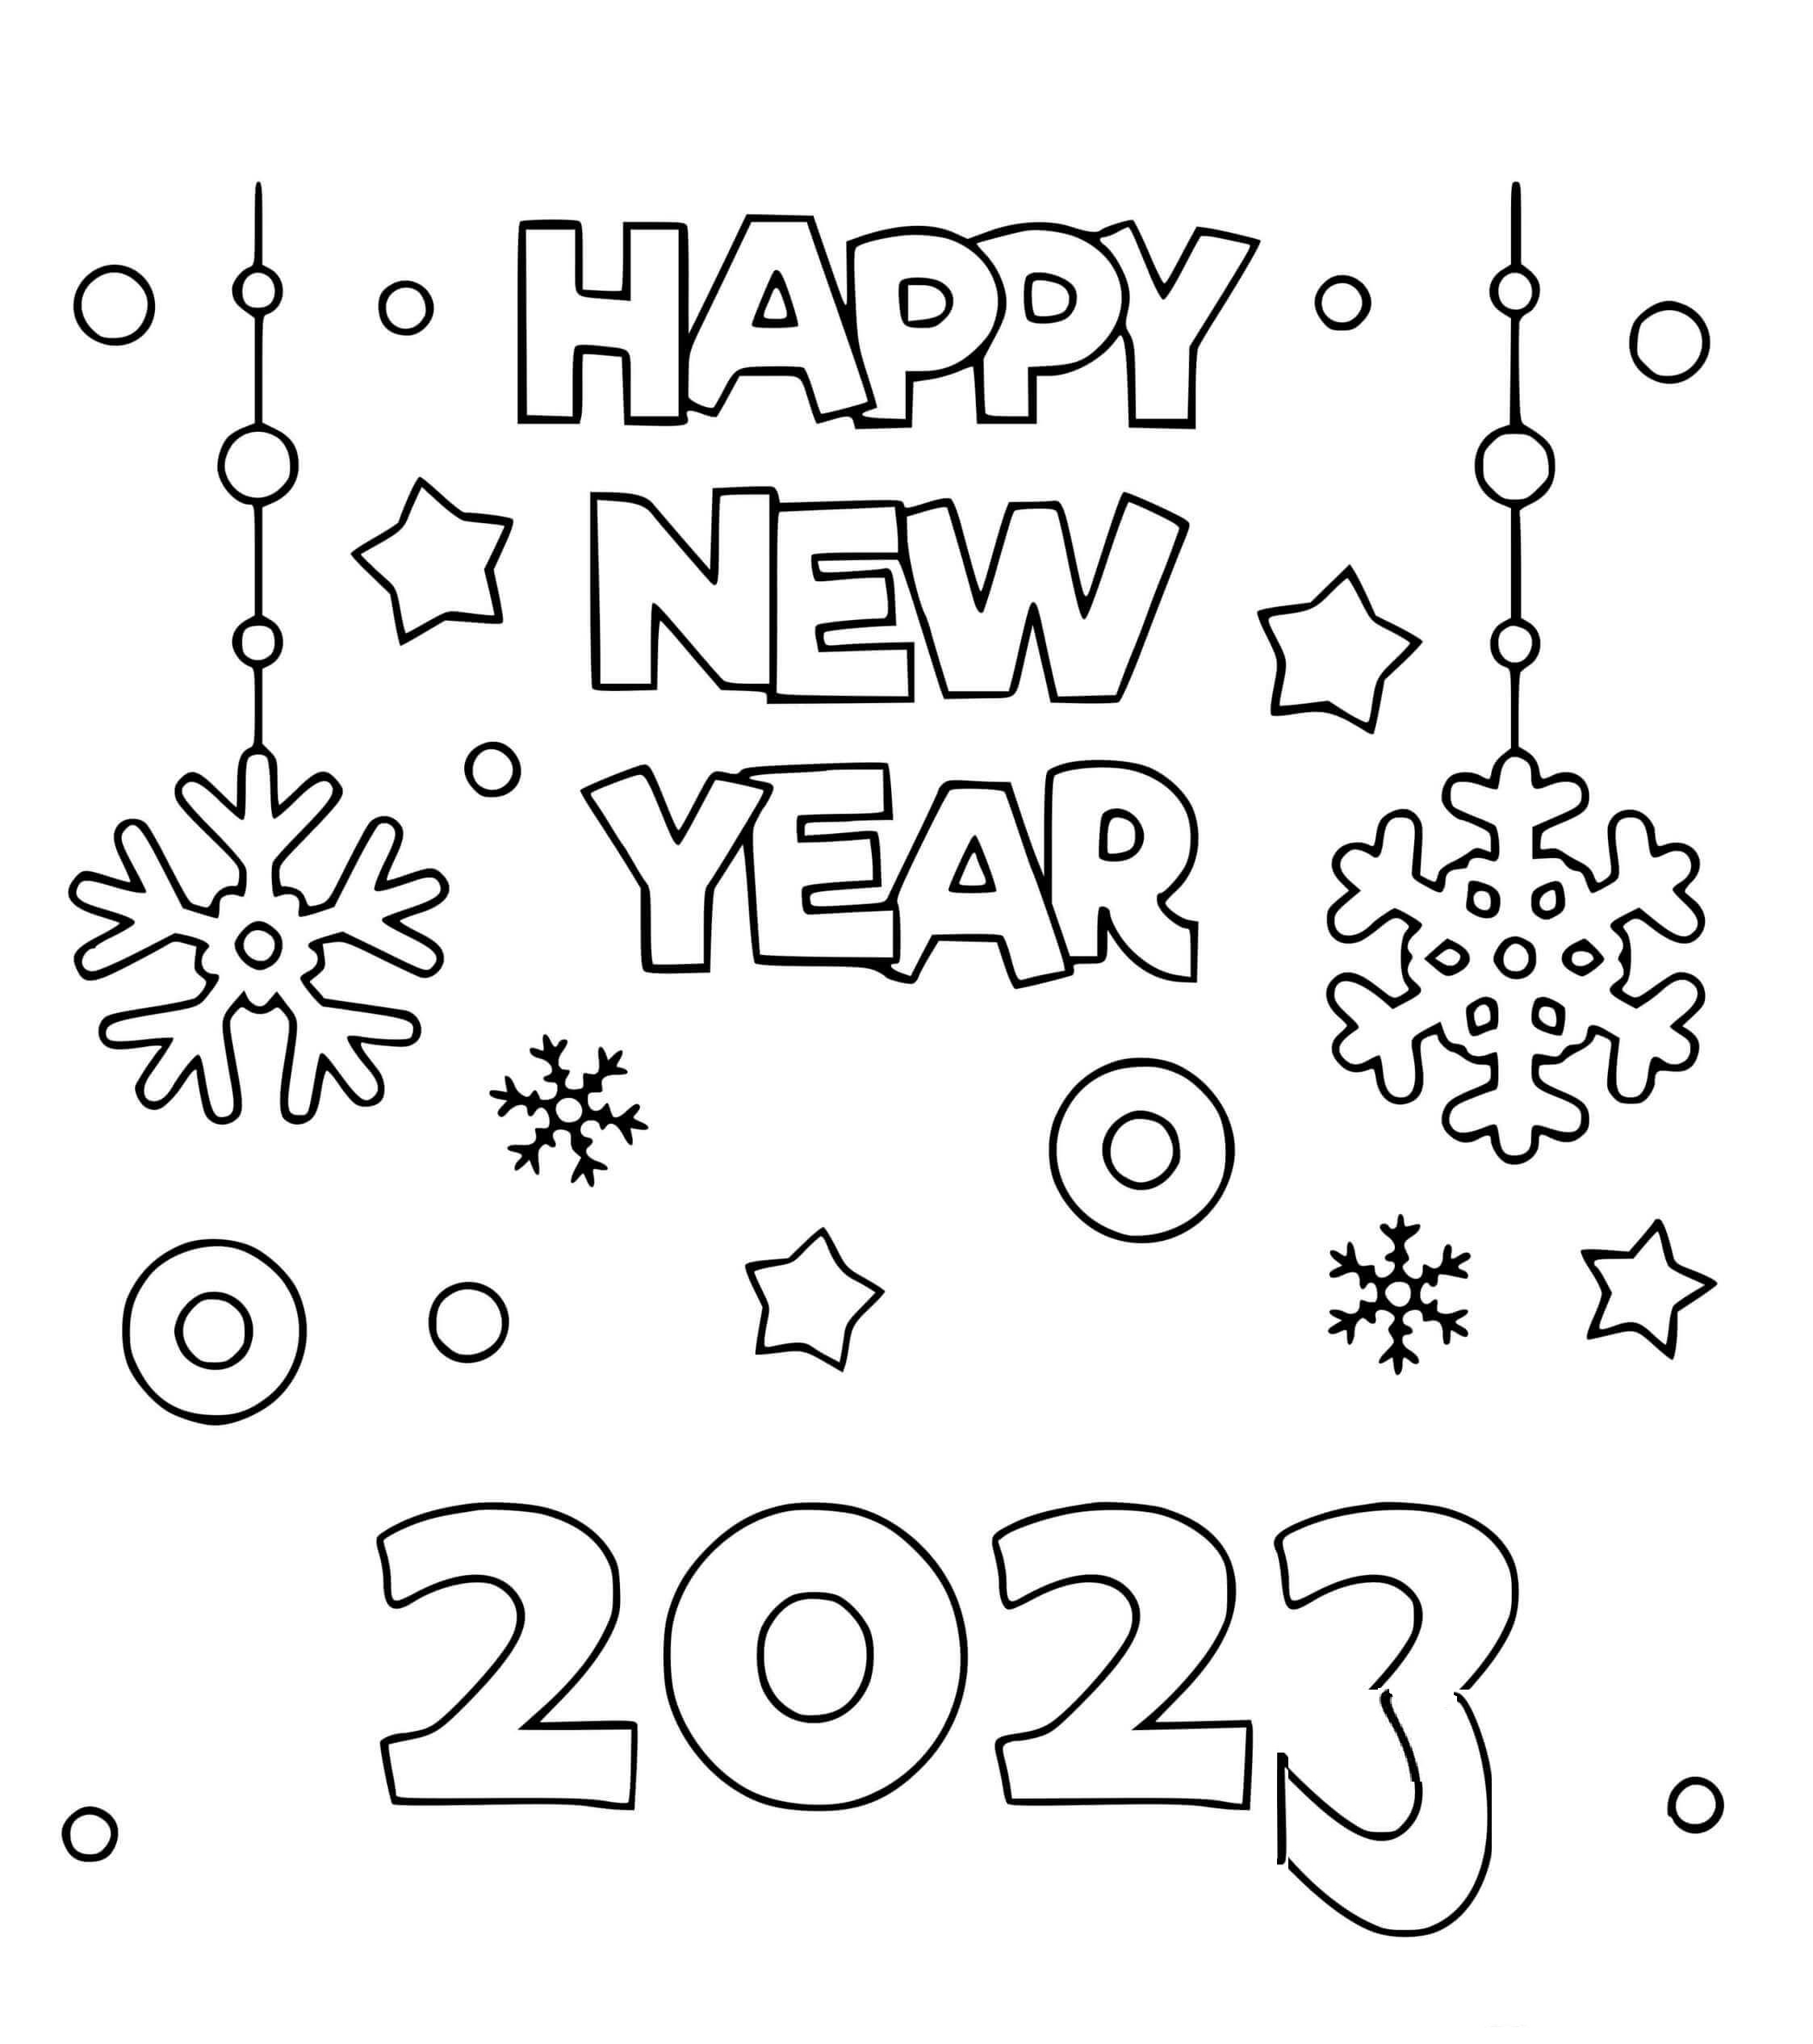 New Year   2023 live.com Coloring Page Printable for Kids, Free, Simple and Easy, as PDF